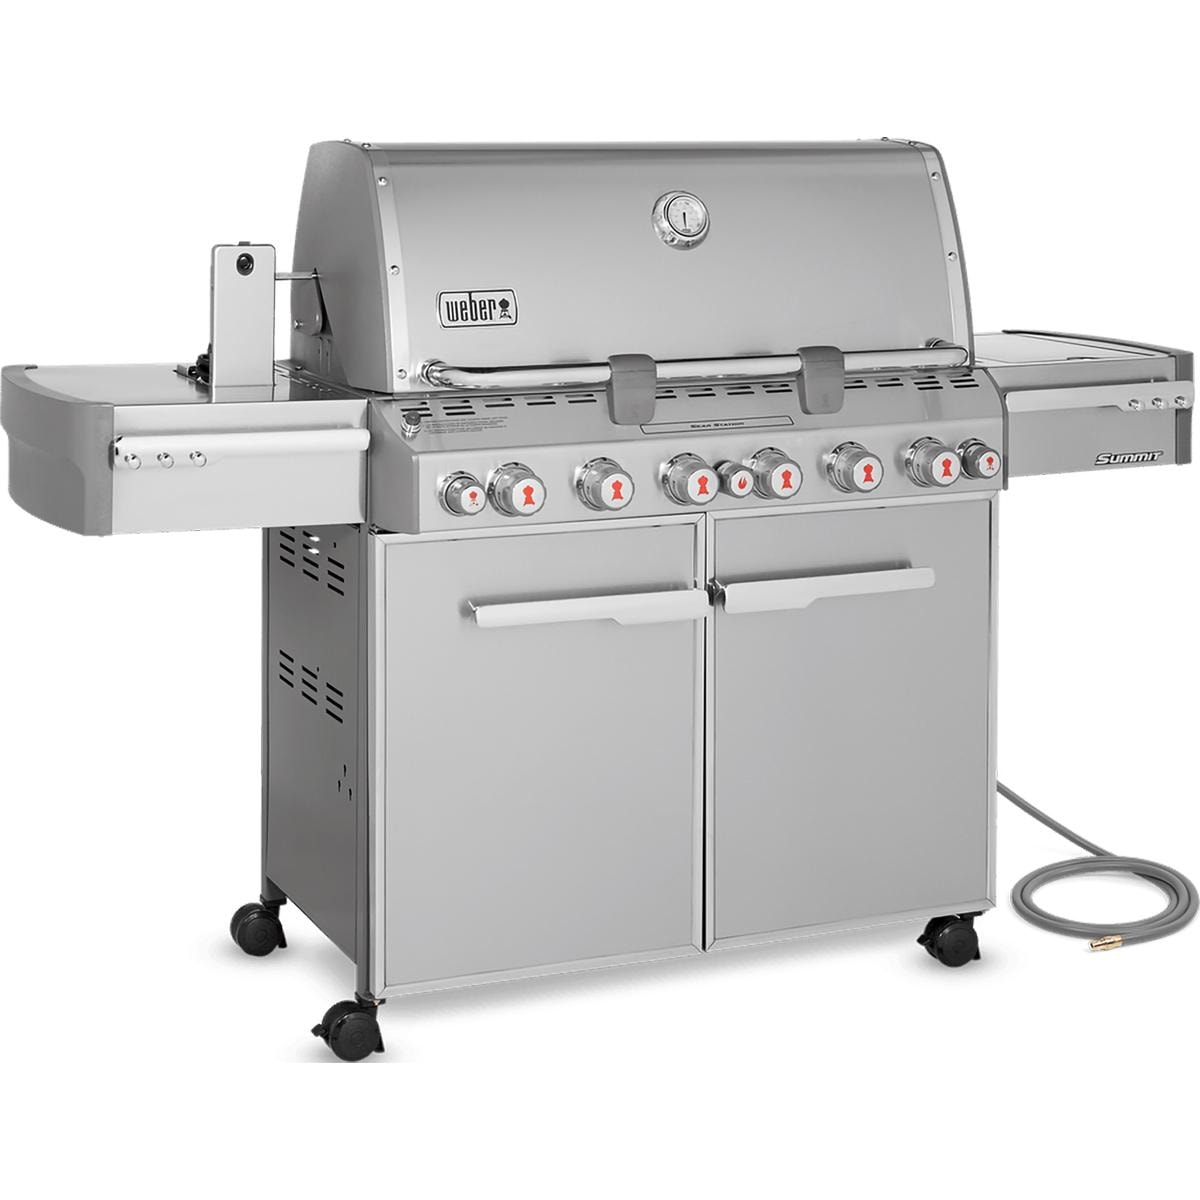 Summit S-670 Natural Gas Grill/Rotisserie - image 2 of 6